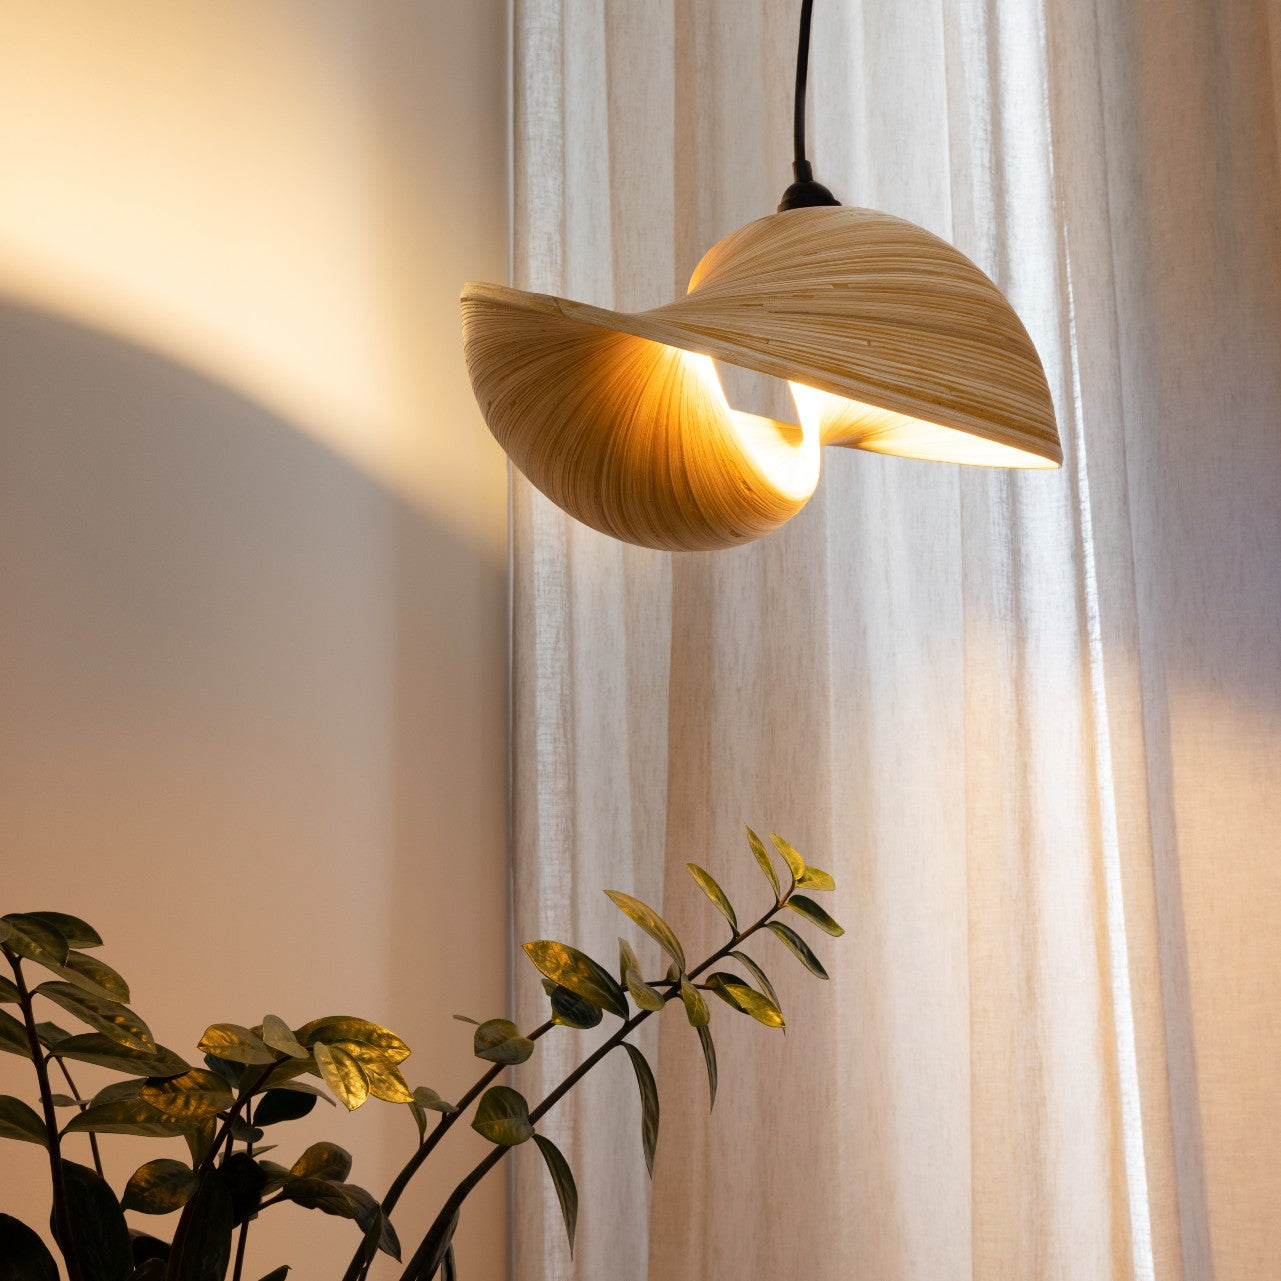 curved bamboo pendant light glowing beautifully. photo shows how light glows upwards as well as down agains a sheer linen curtain